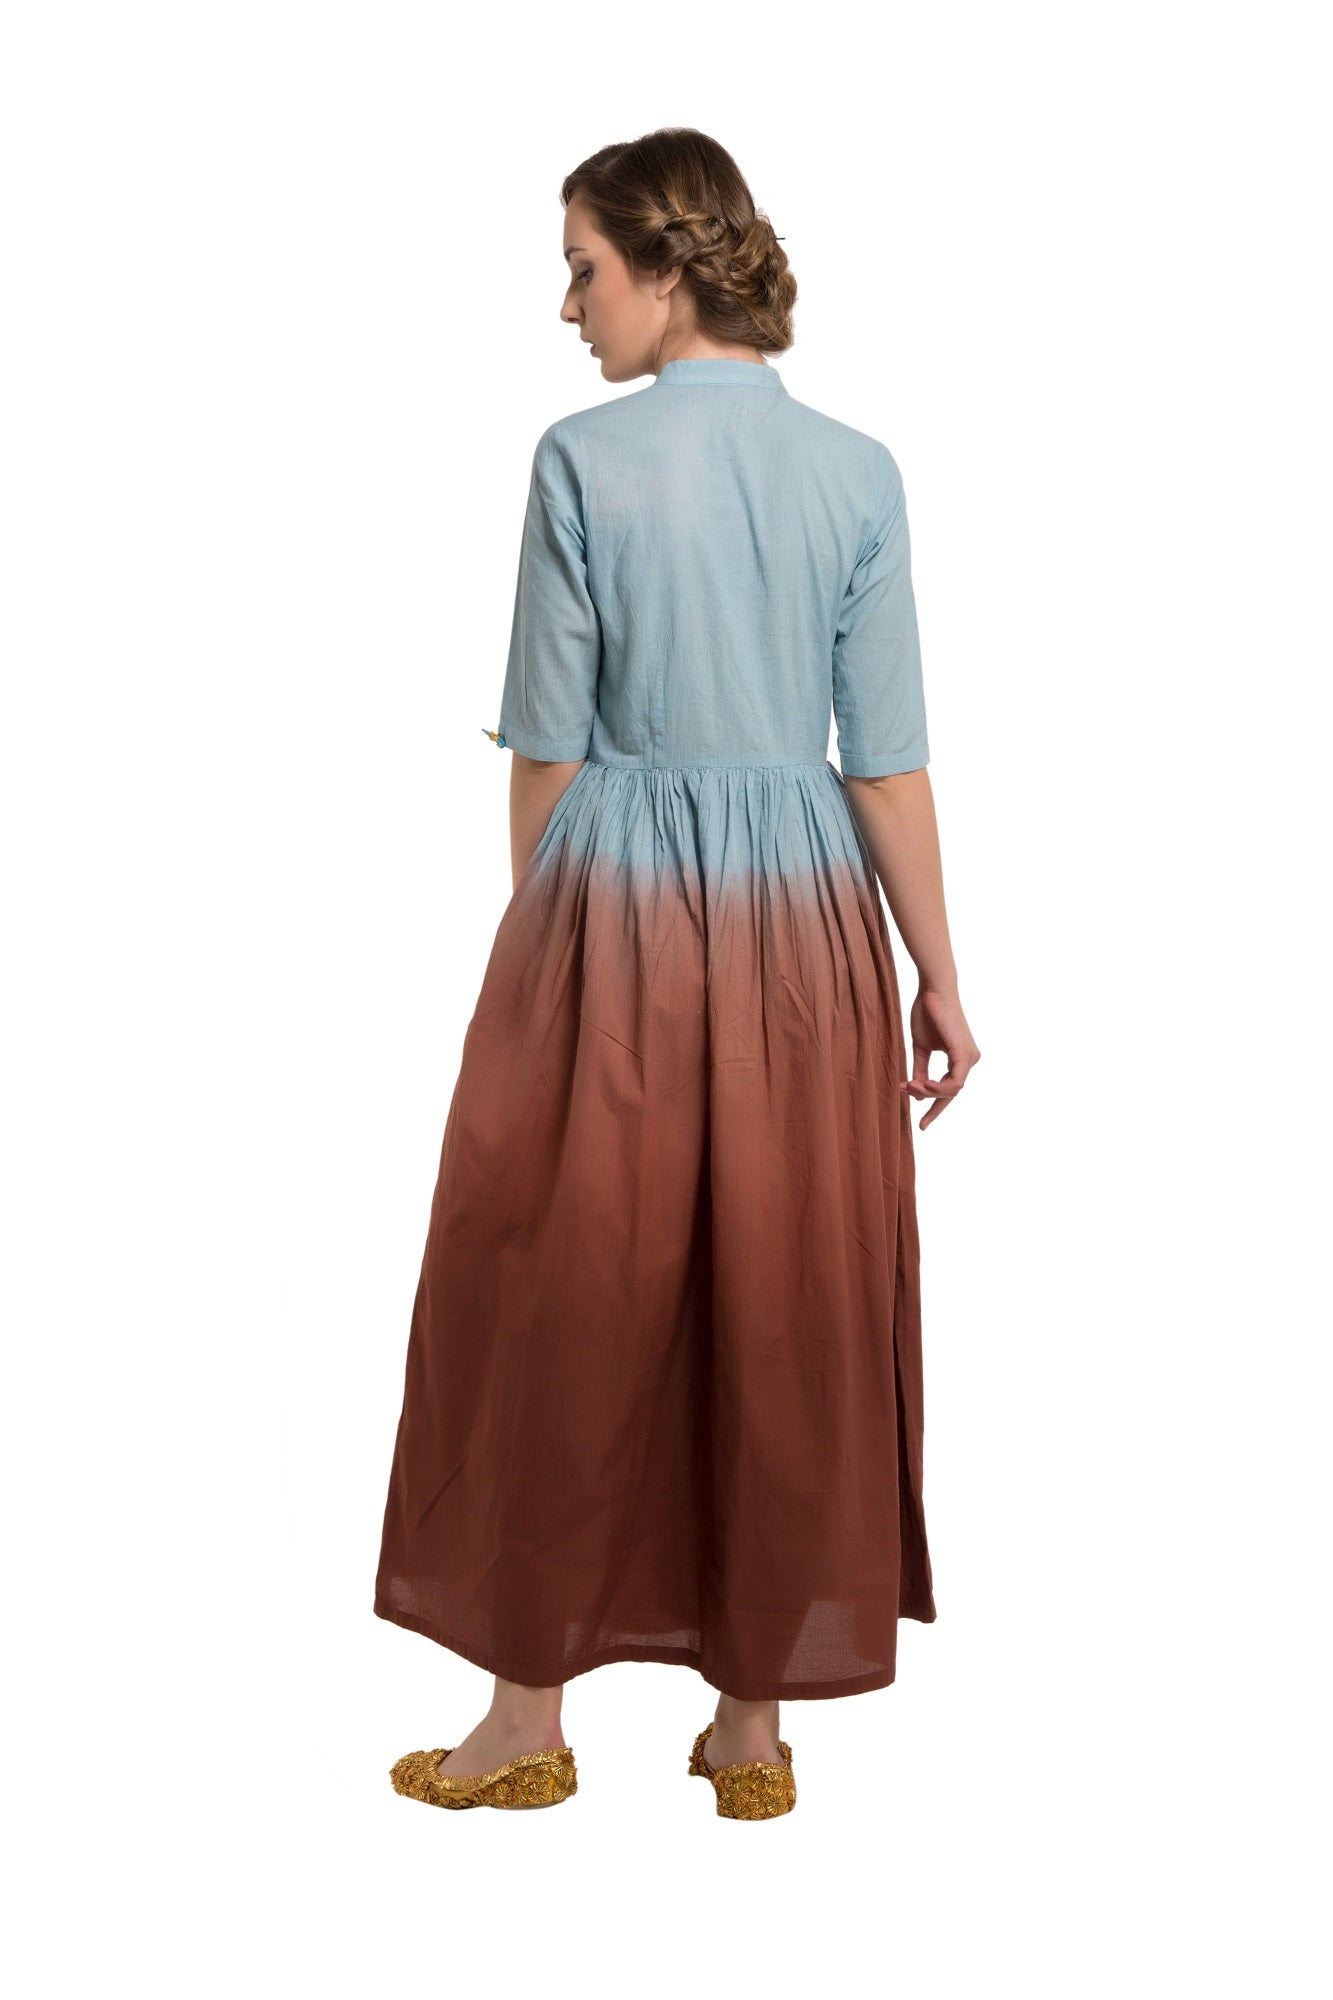 Ombre Blue And Brown Cotton Dress